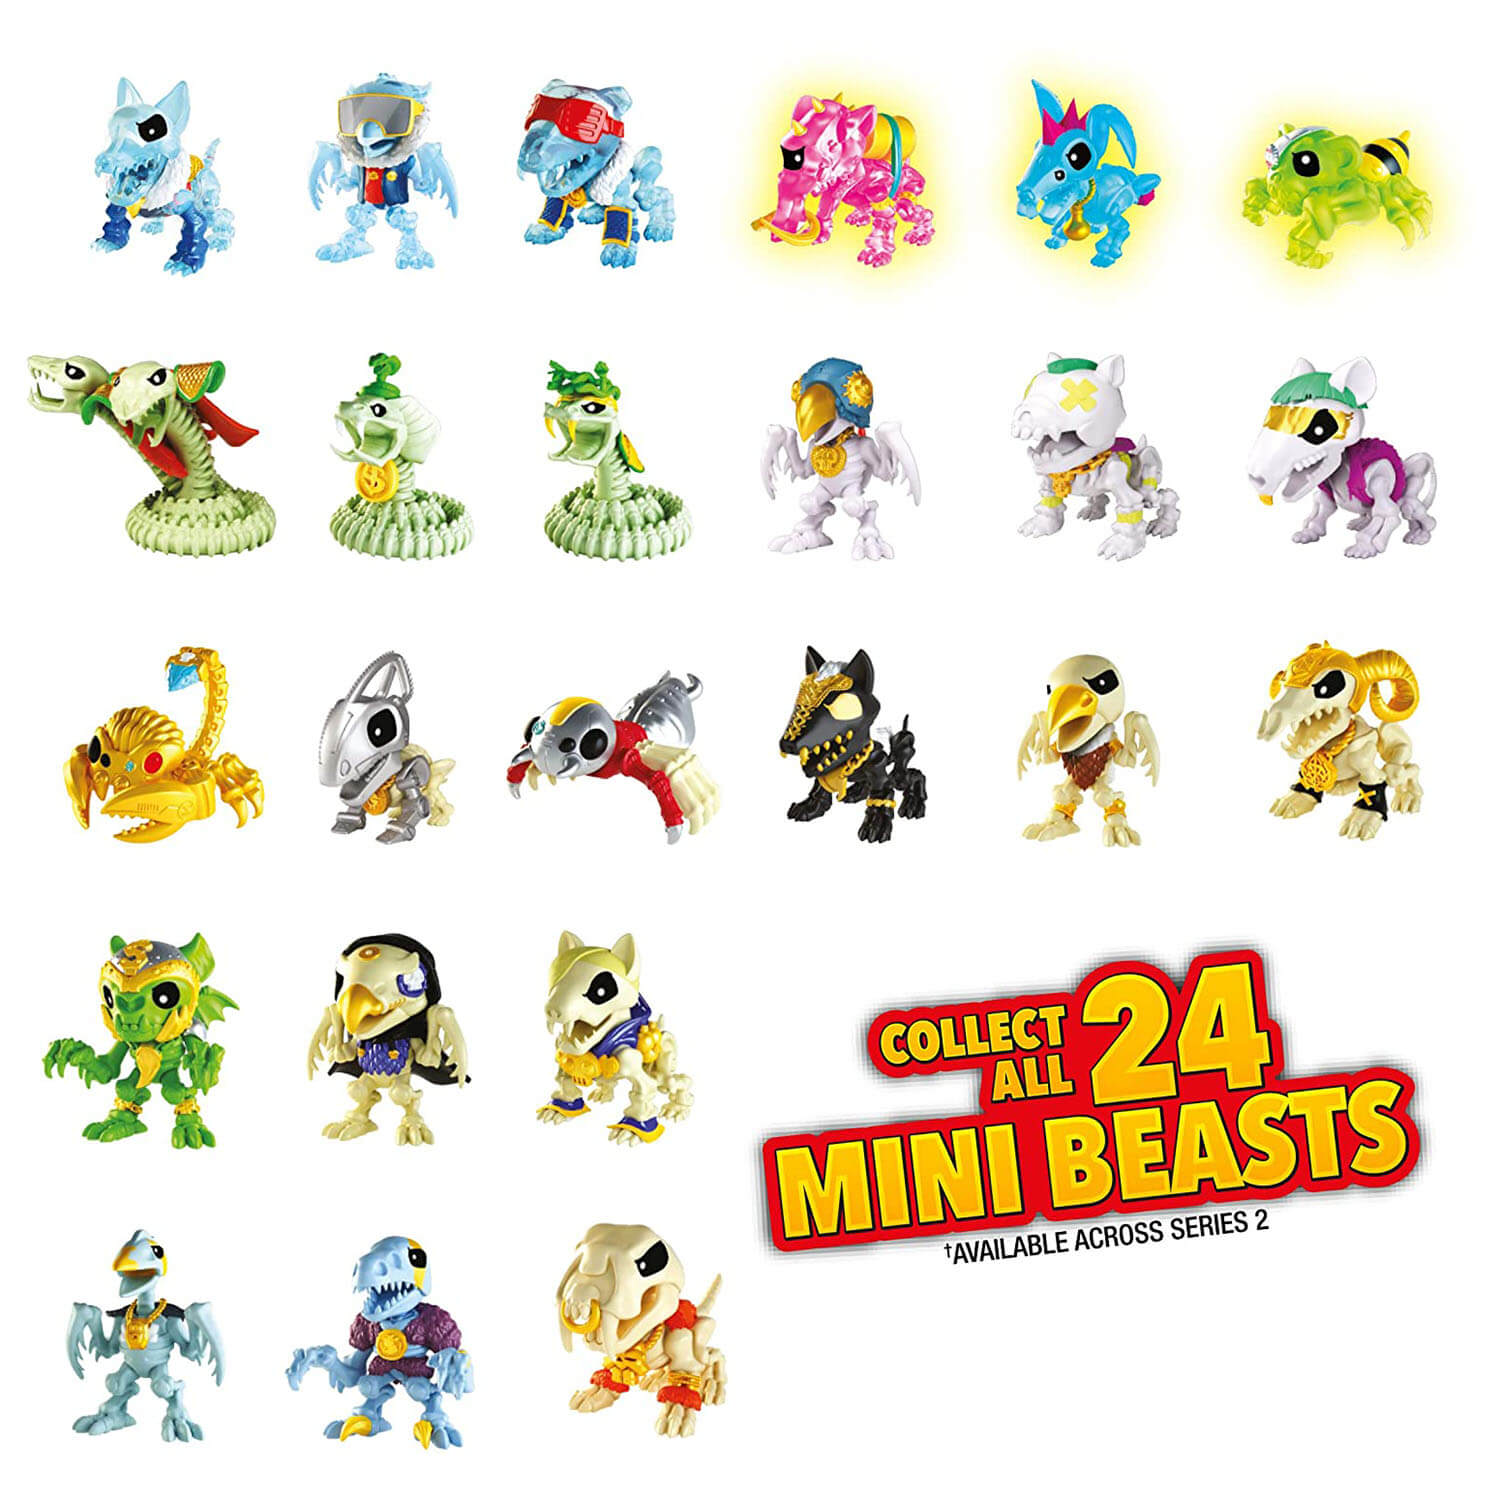 Front view of all collectible figures.